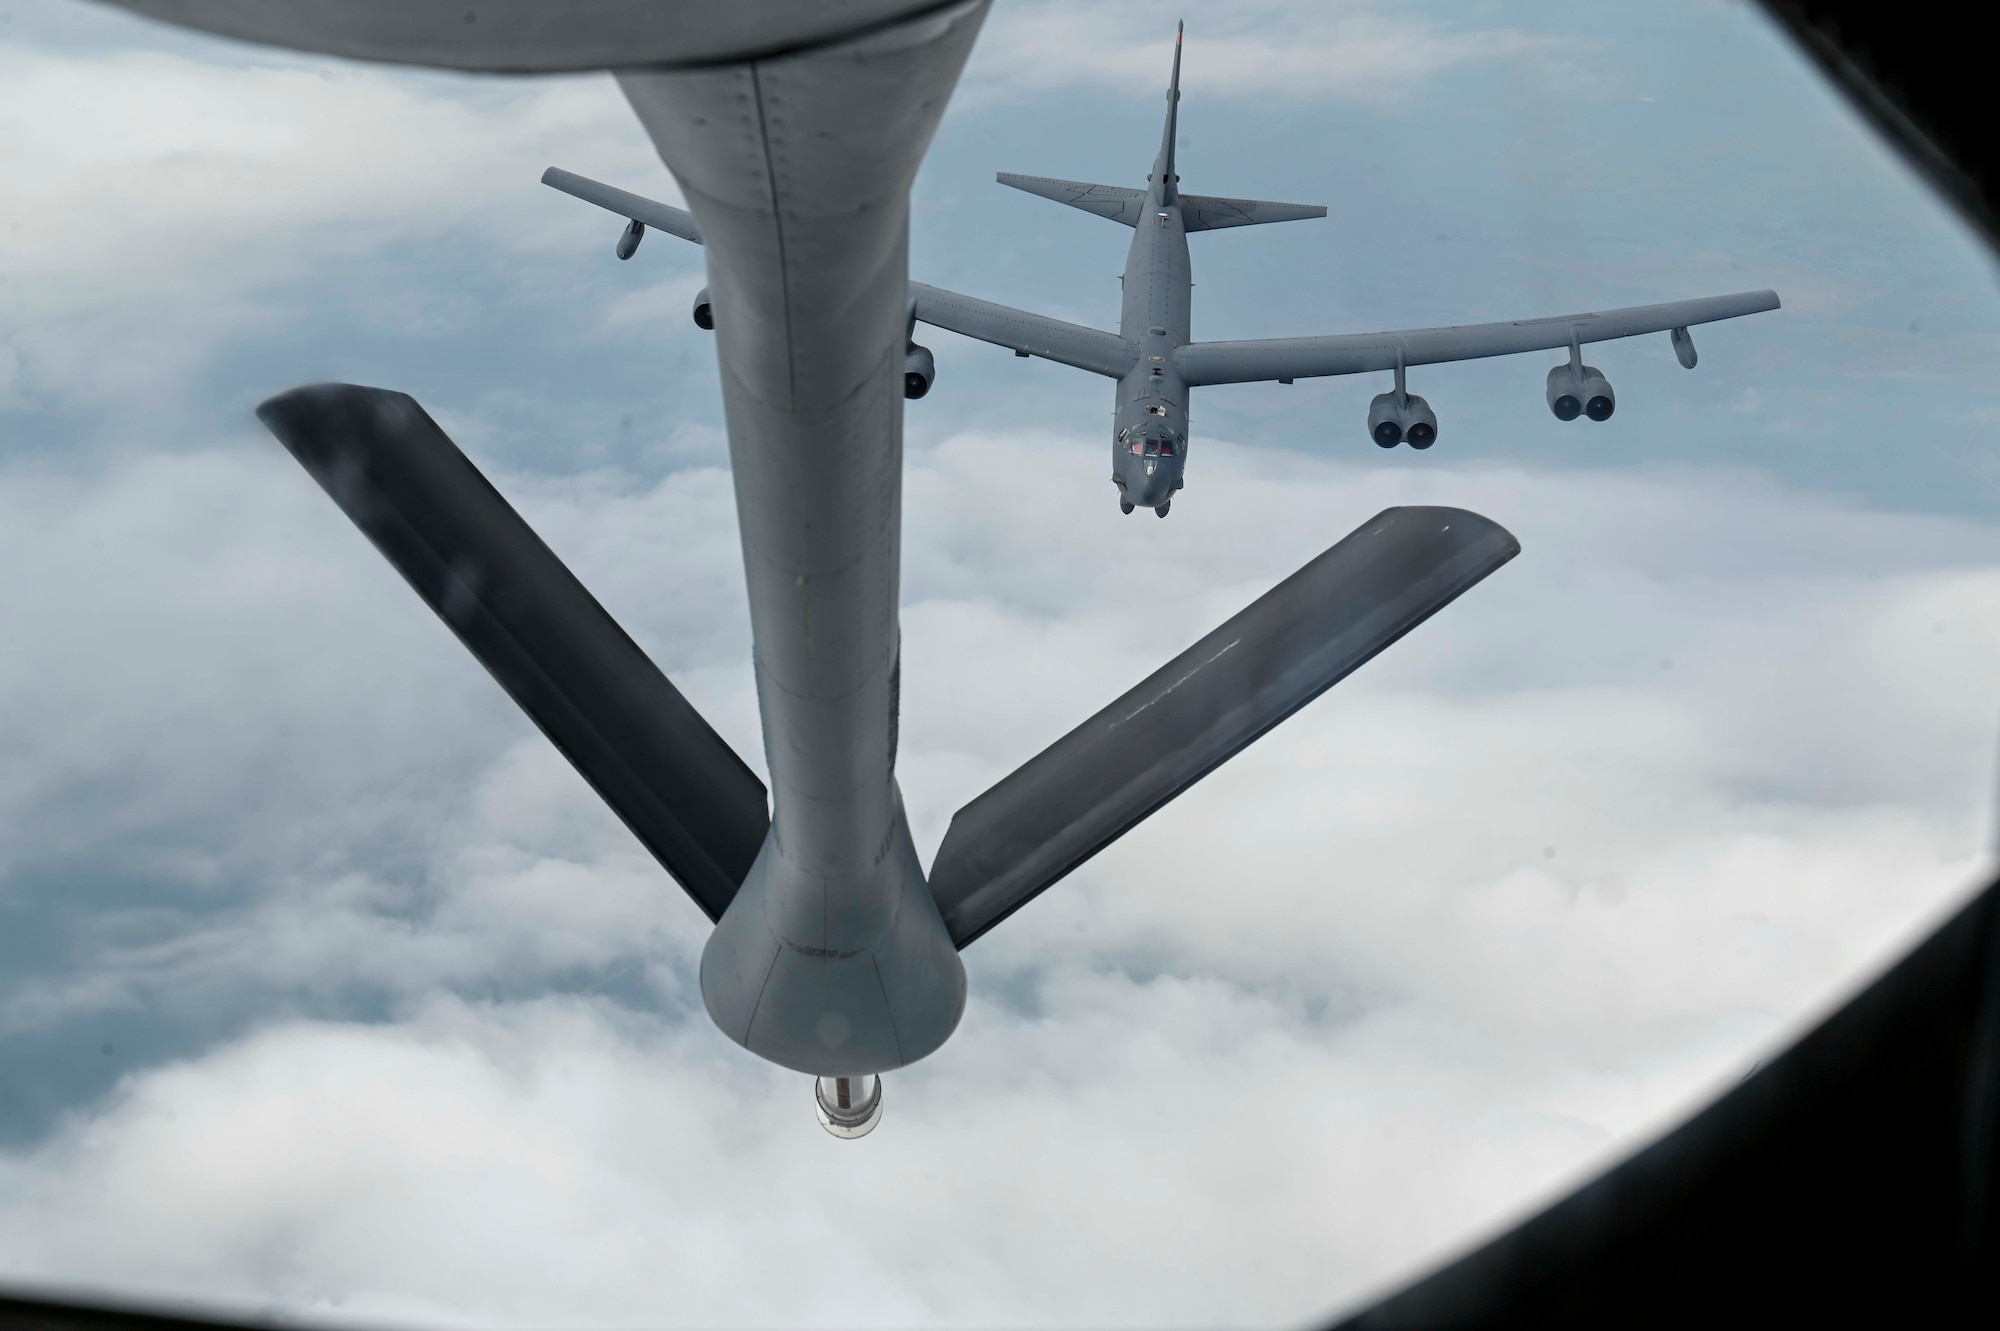 A KC-135 Stratotanker assigned to the 92nd Air Refueling Wing demonstrates aerial refueling capabilities with a Boeing B-52 Stratofortress from Minot Air Force Base, Montana, as part of Operation Centennial Contact out of Fairchild Air Force Base, Washington, June 27, 2023. The movement, which included flights over Yellowstone National Park, Mount Rushmore, and Glacier National Park, was part of Air Mobility Command’s celebration of 100 years air refueling operations and demonstrated the 92nd Air Refueling Wing’s global reach capabilities. Since its inception in 1923, air refueling has become a crucial component of military and civilian aviation operations around the world by extending the range and endurance of aircraft and enabling them to complete missions that would otherwise be impossible or require multiple stops. As a result, this capability is essential for strategic and tactical operations, as well as humanitarian relief efforts in support of AMC, U.S. Transportation Command and Department of Defense priorities. (U.S. Air Force photo by Airman 1st Class Haiden Morris)